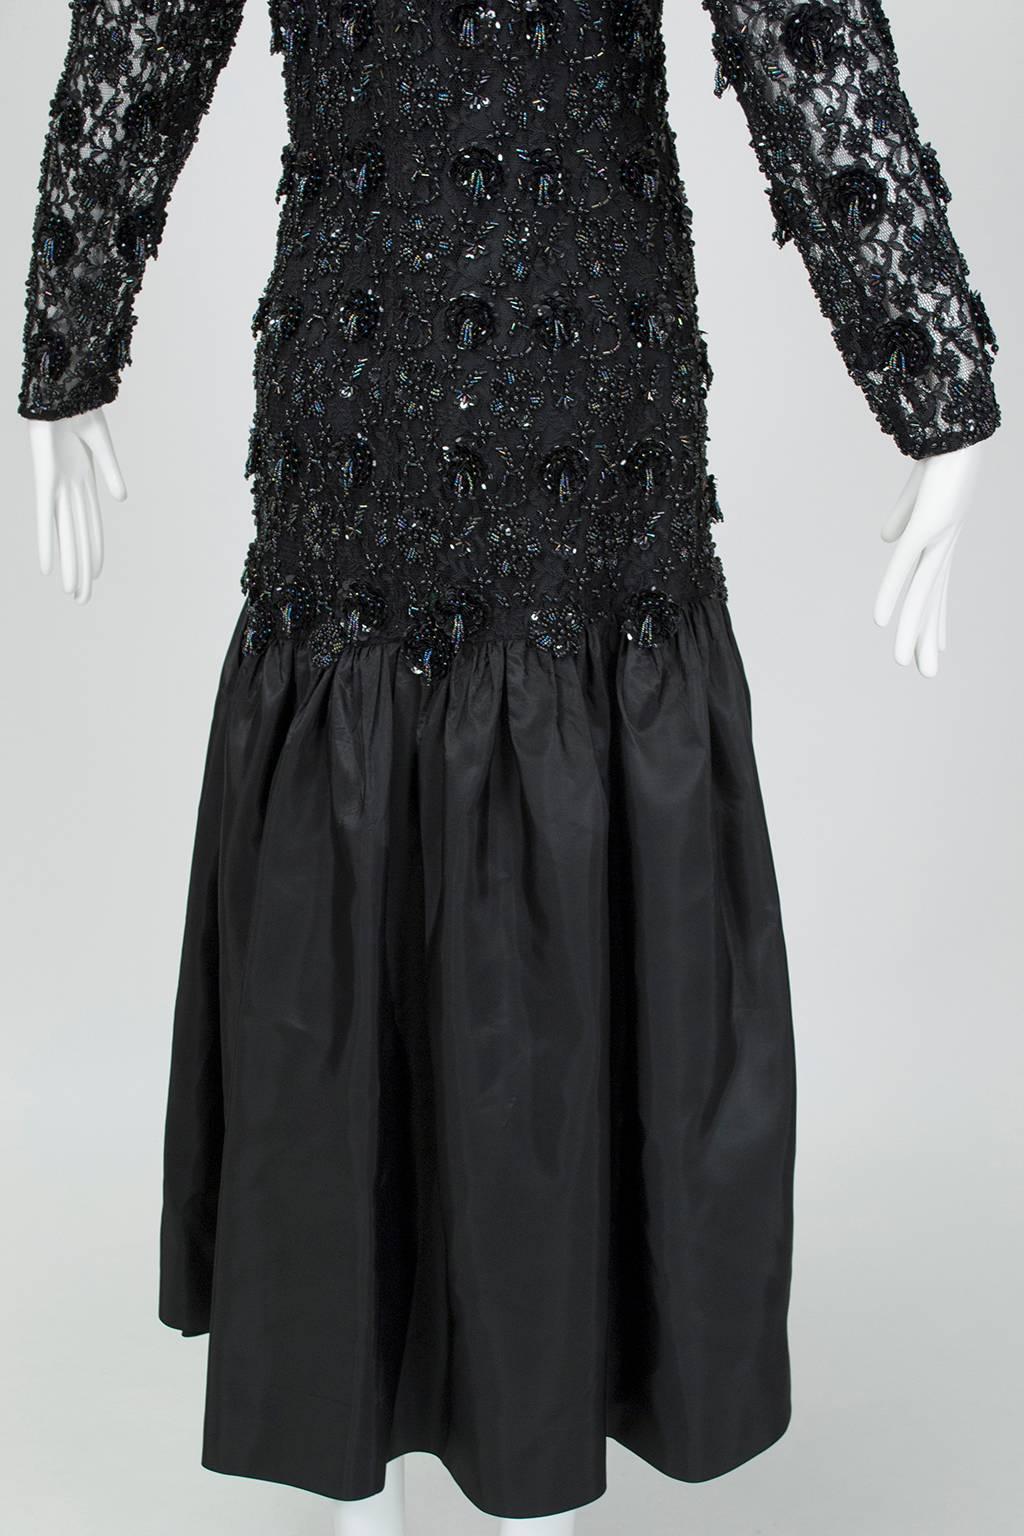 Oleg Cassini Glam Black Beaded Illusion Power Gown with Trumpet Skirt - S, 1980s For Sale 1